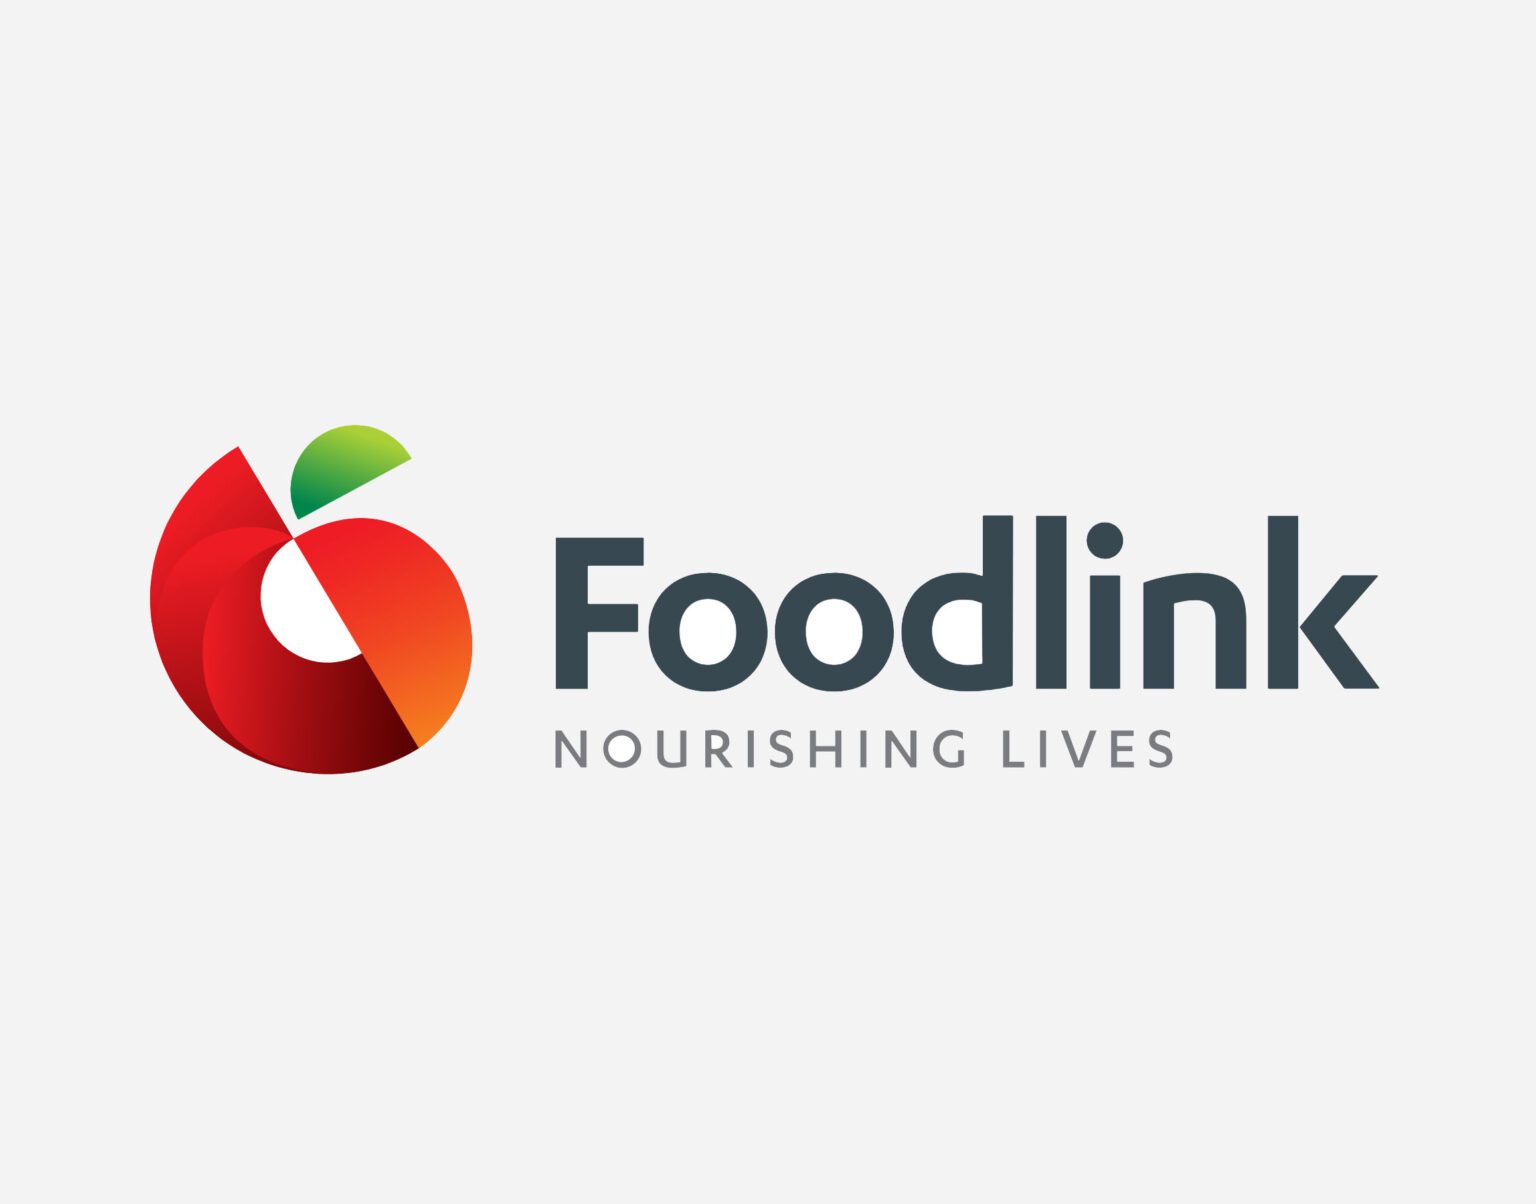 Got a nutrition question? Ask away! Foodlink Inc